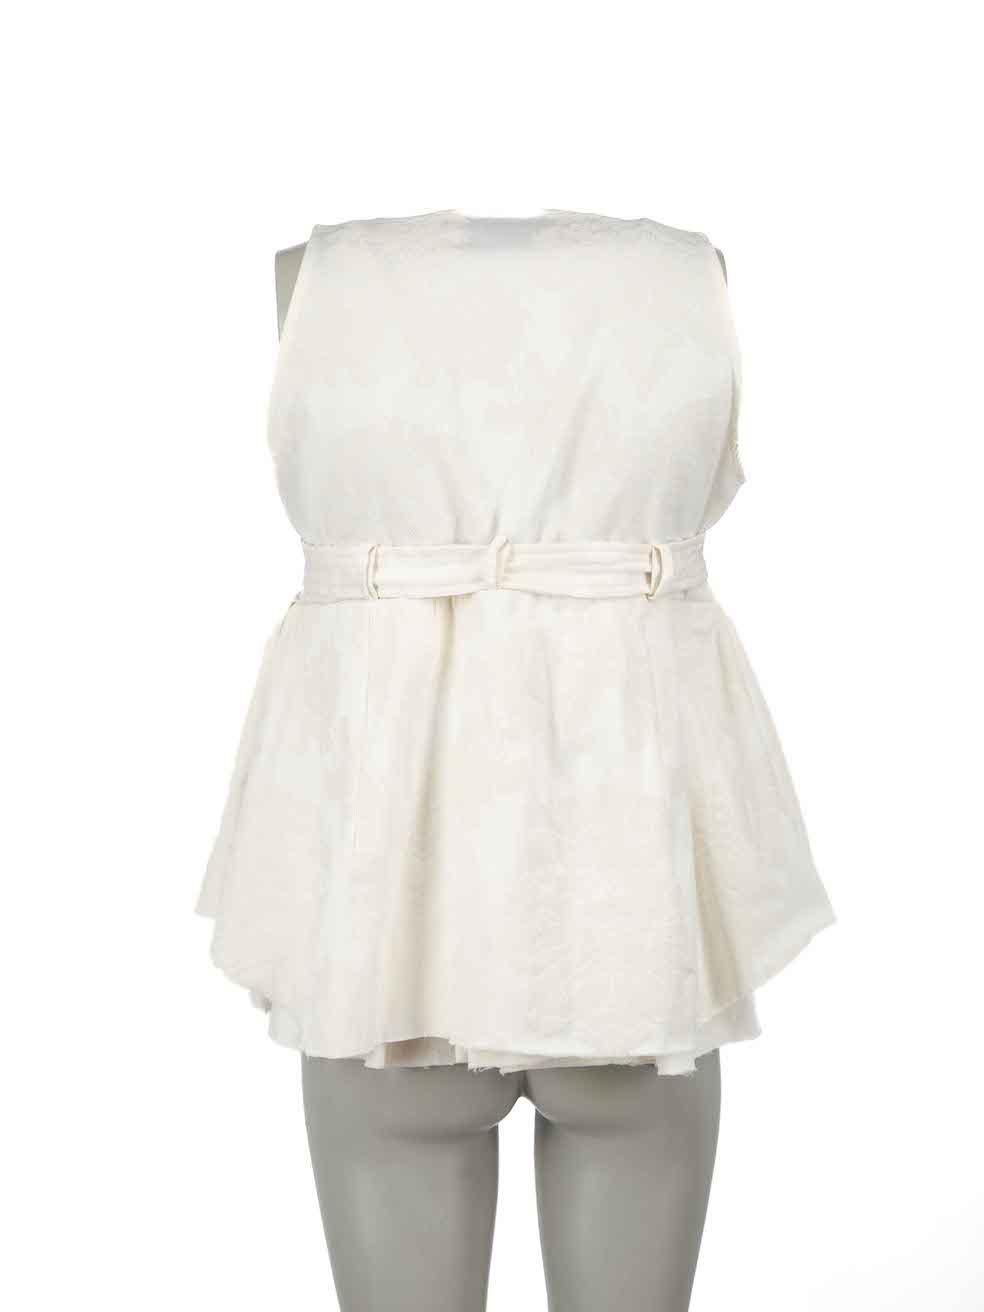 Marques Almeida Cream Floral Jacquard Peplum Top Size M In Excellent Condition For Sale In London, GB